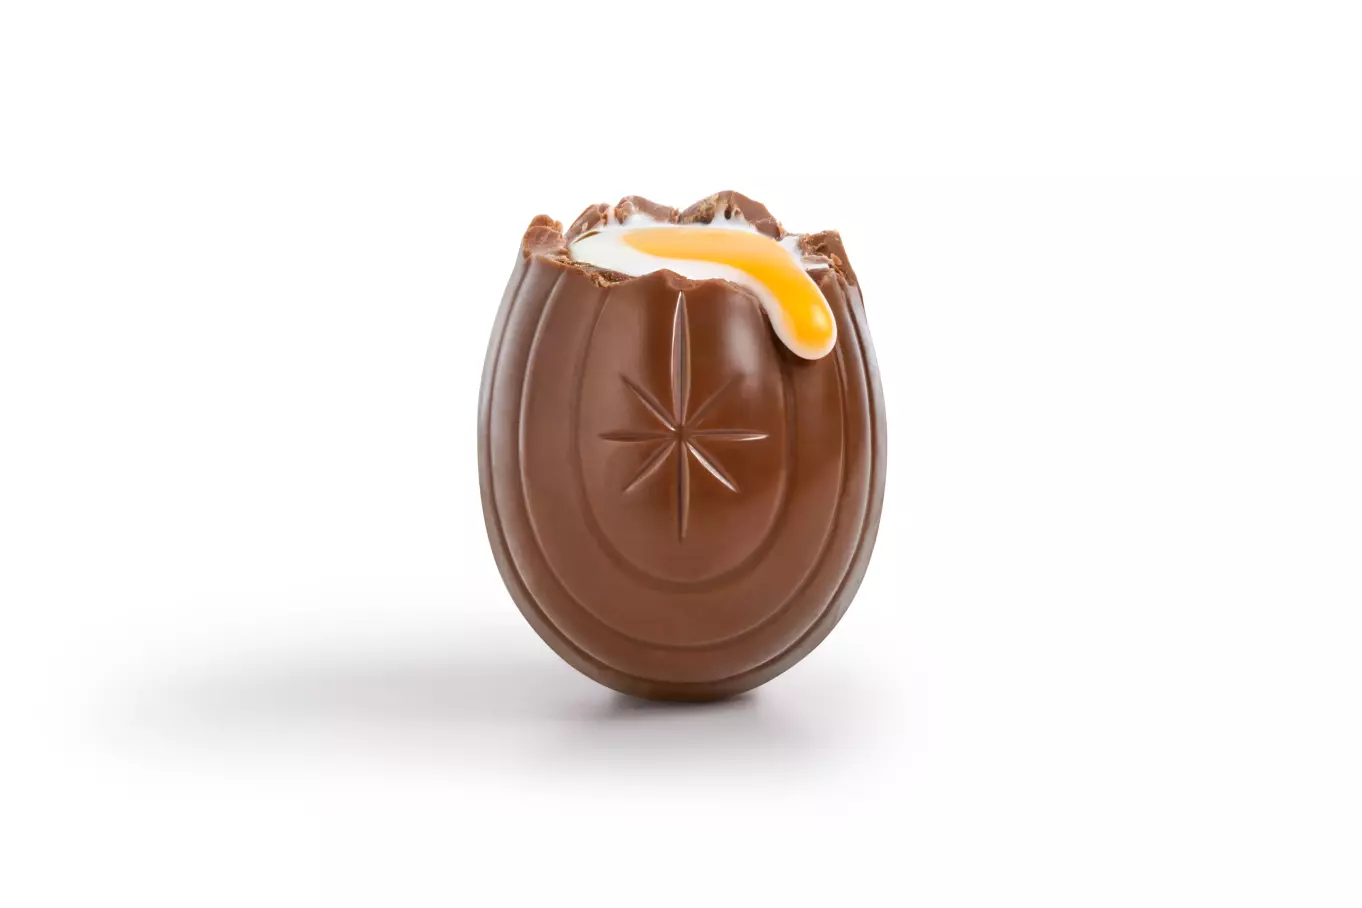 CADBURY CREME EGG Milk Chocolate Egg, 1.2 oz - Out of Package